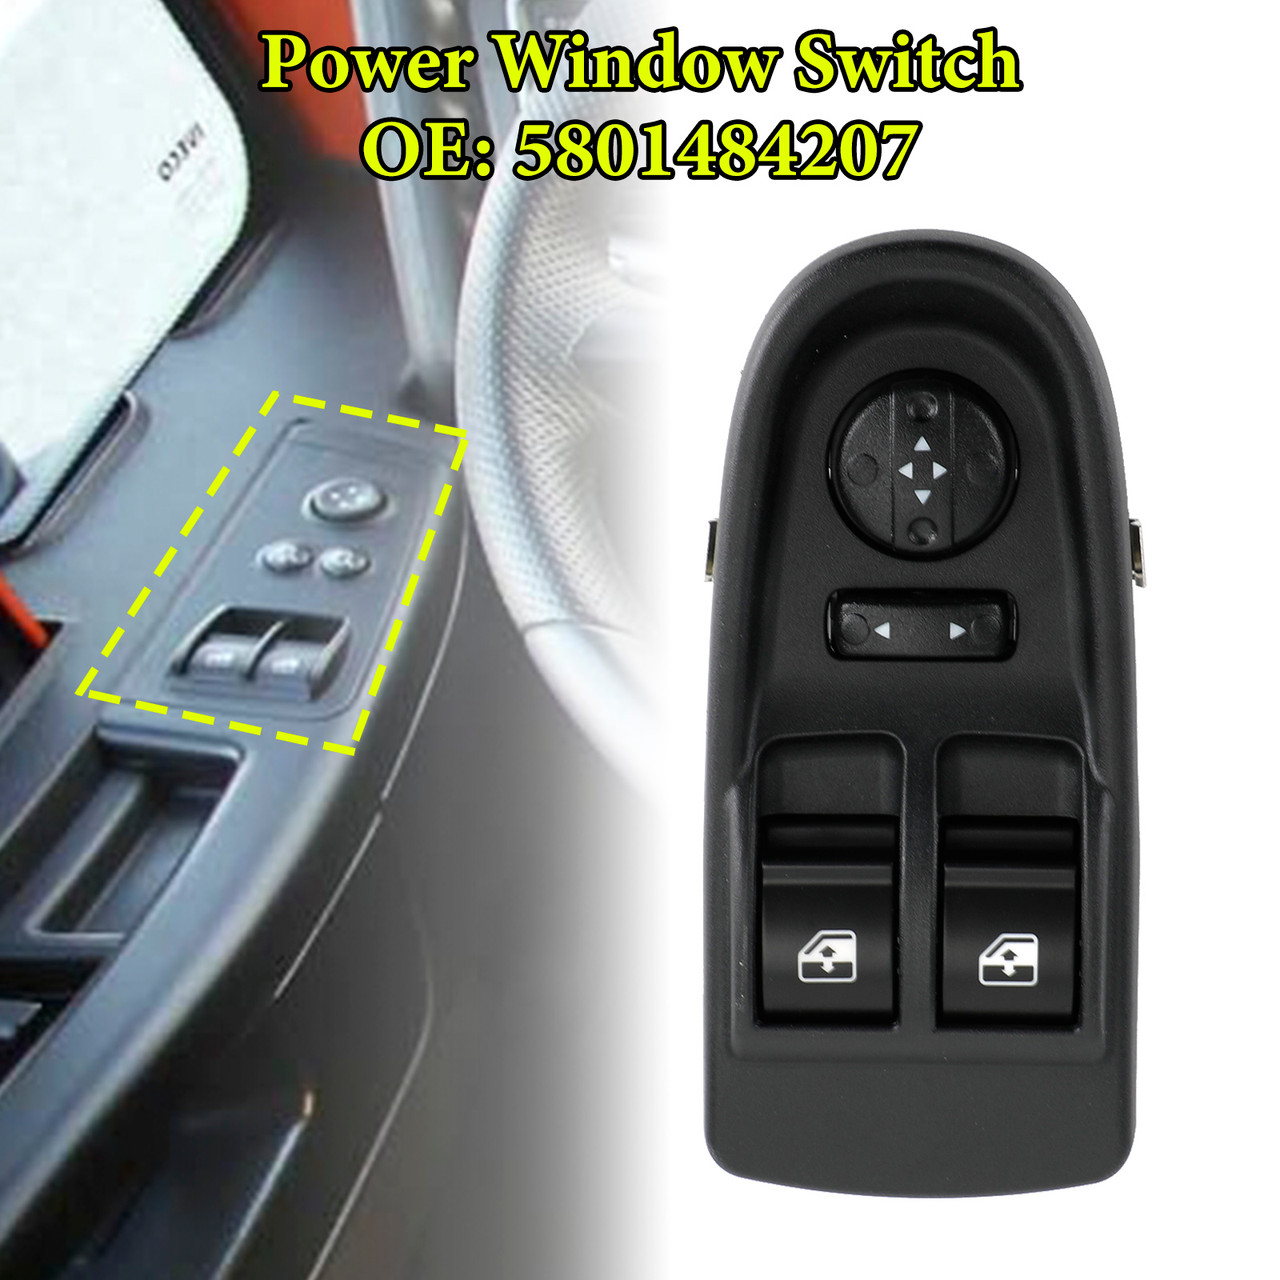 Power Window Switch 5801484207 for IVECO DAILY 2011-2014 EWS/VC/003A